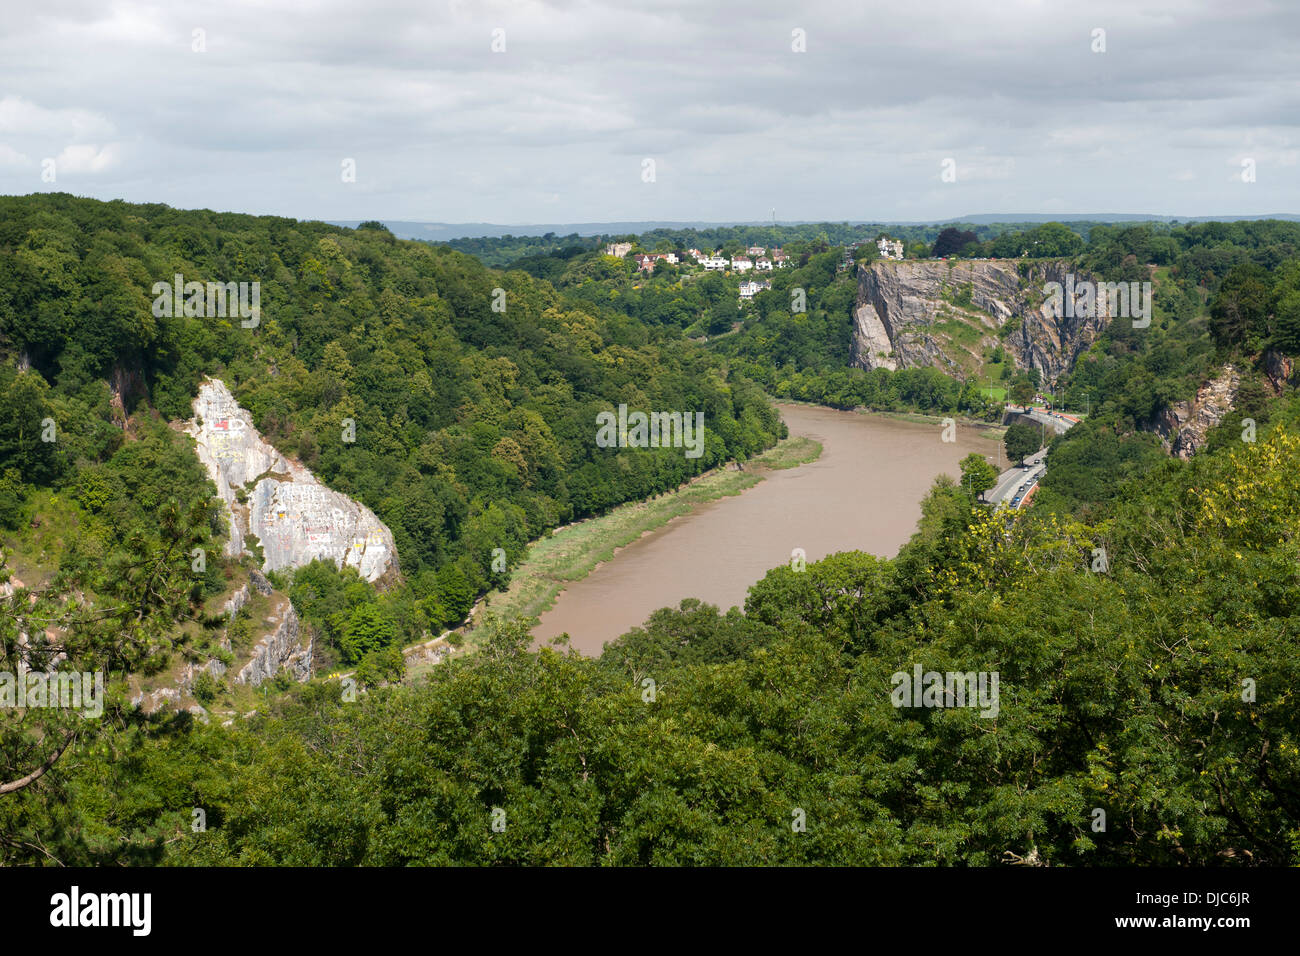 The Avon river and gorge just outside Bristol in England. Stock Photo